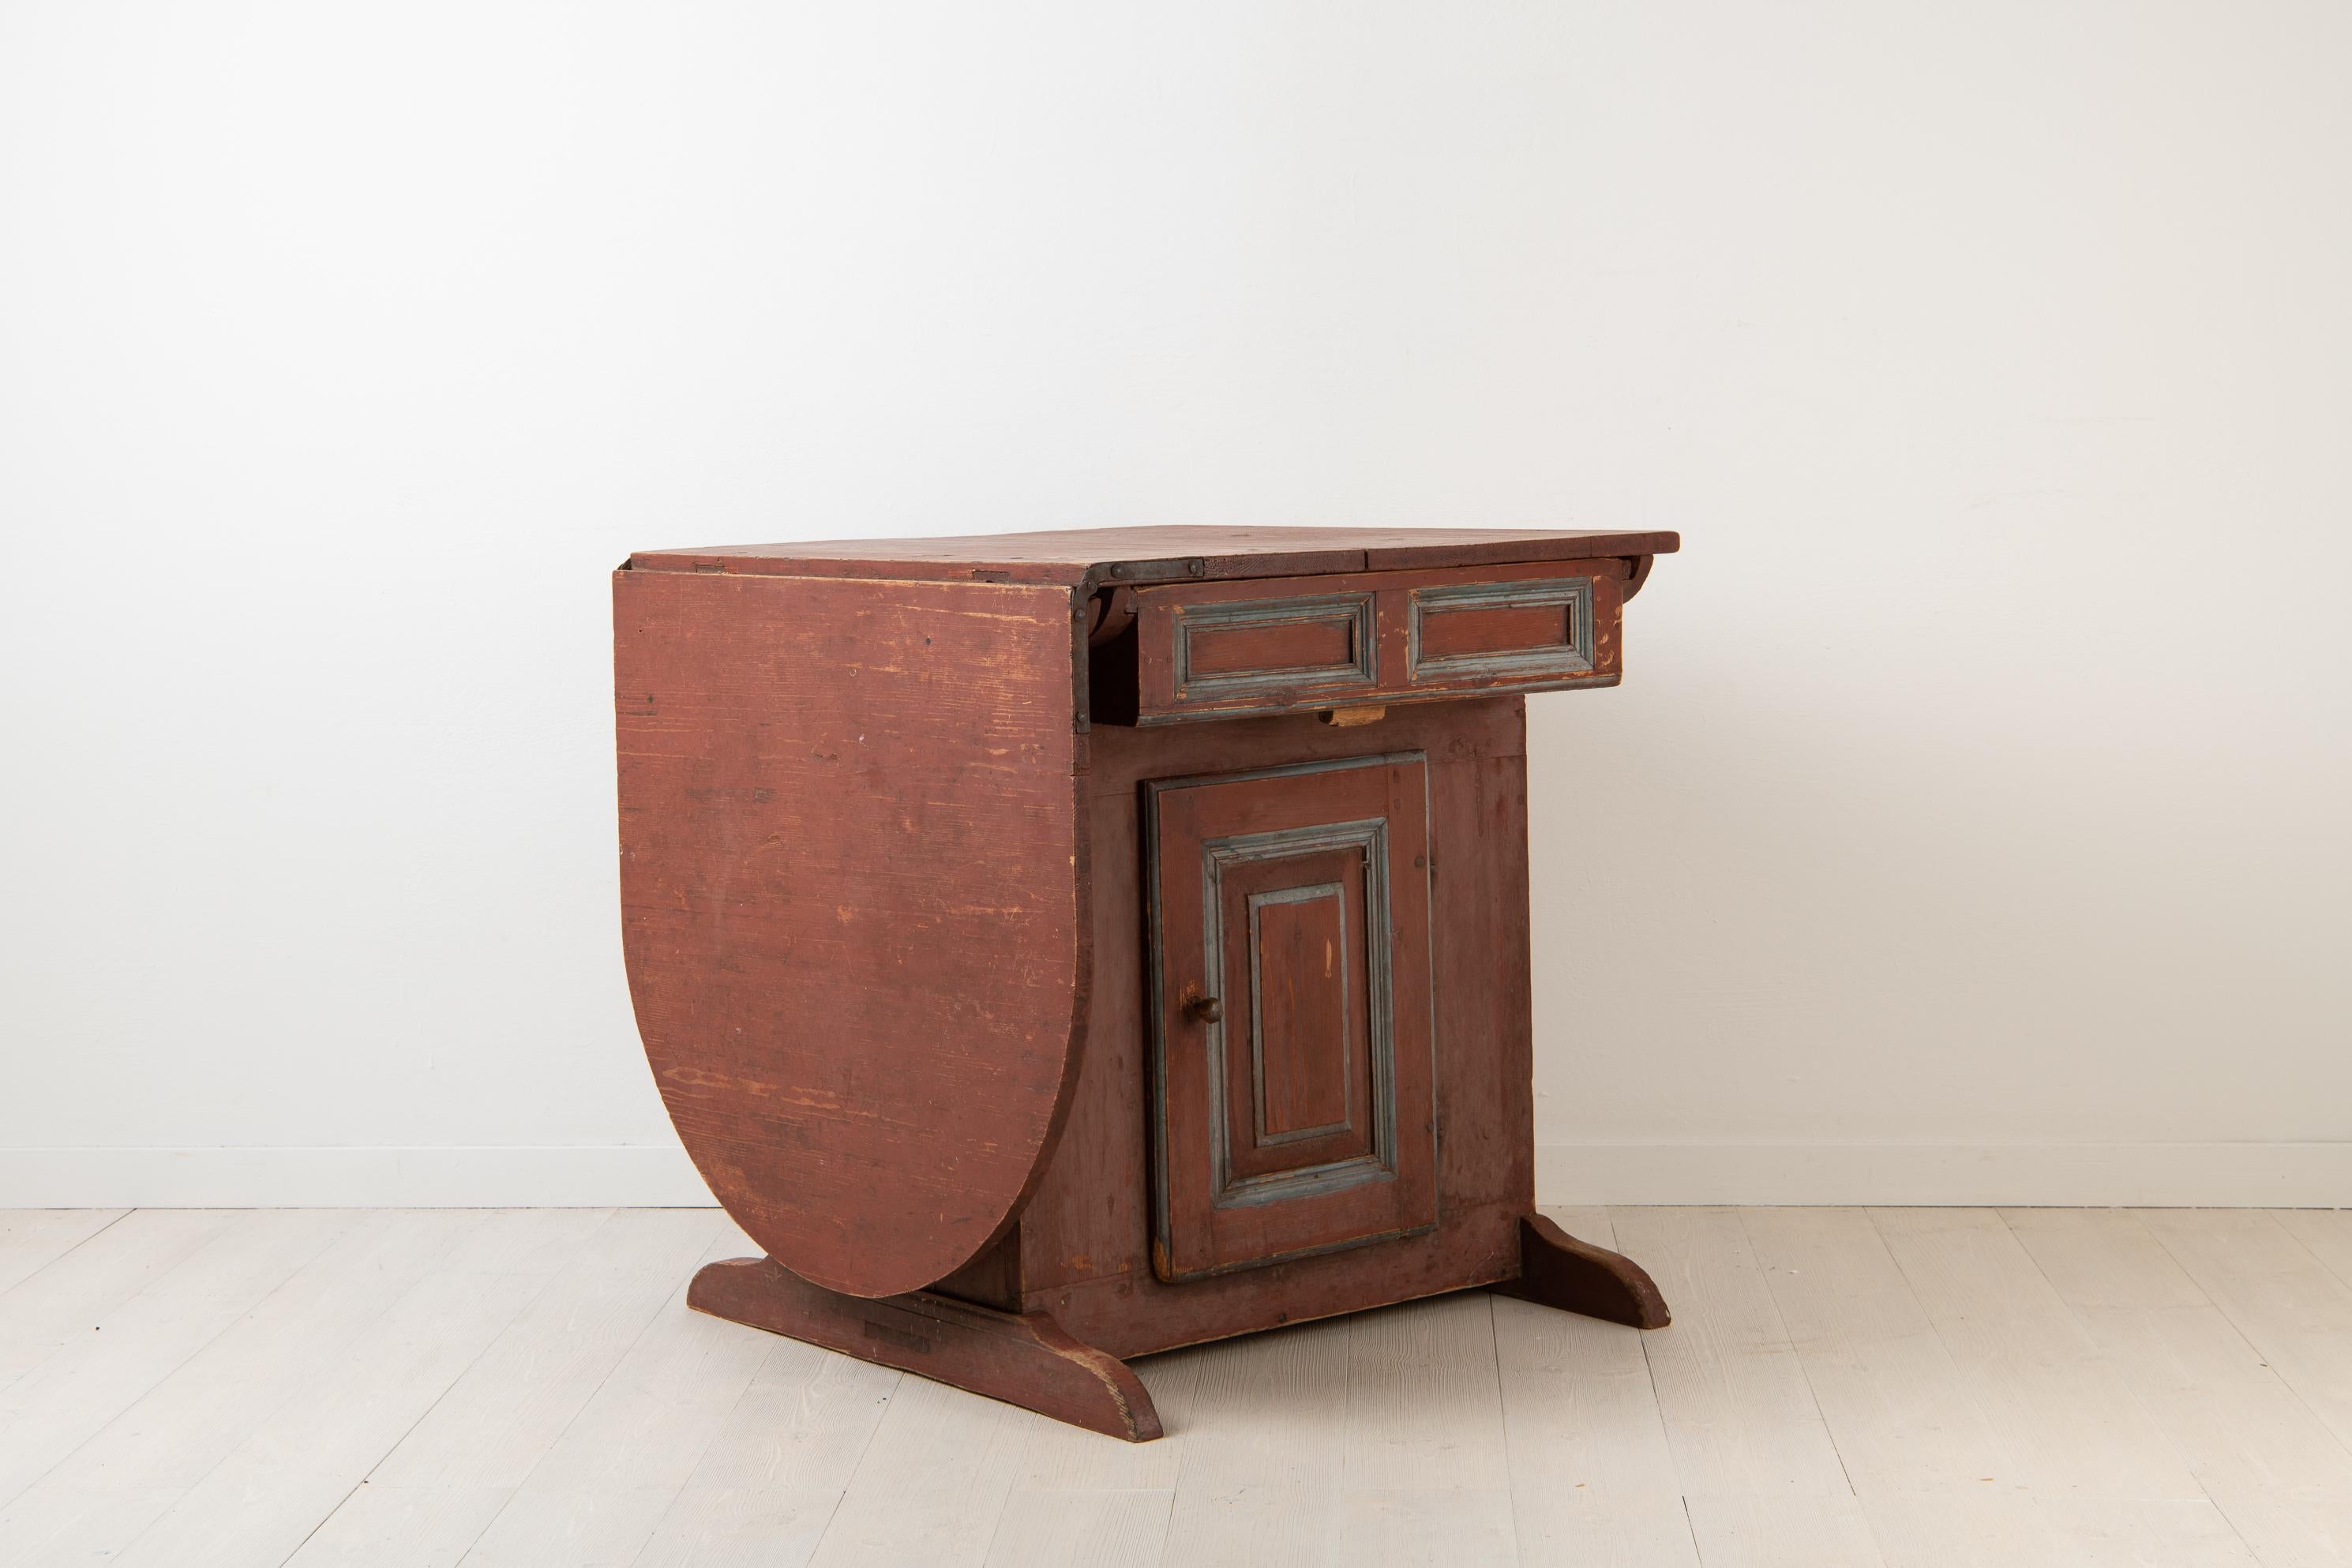 Primitive Folk Art table from Sweden. The table have most likely been used as a wall table or a window table where it is placed just underneath the windowsill. The locking mechanism to the door is unusual as it is made completely from wood - see